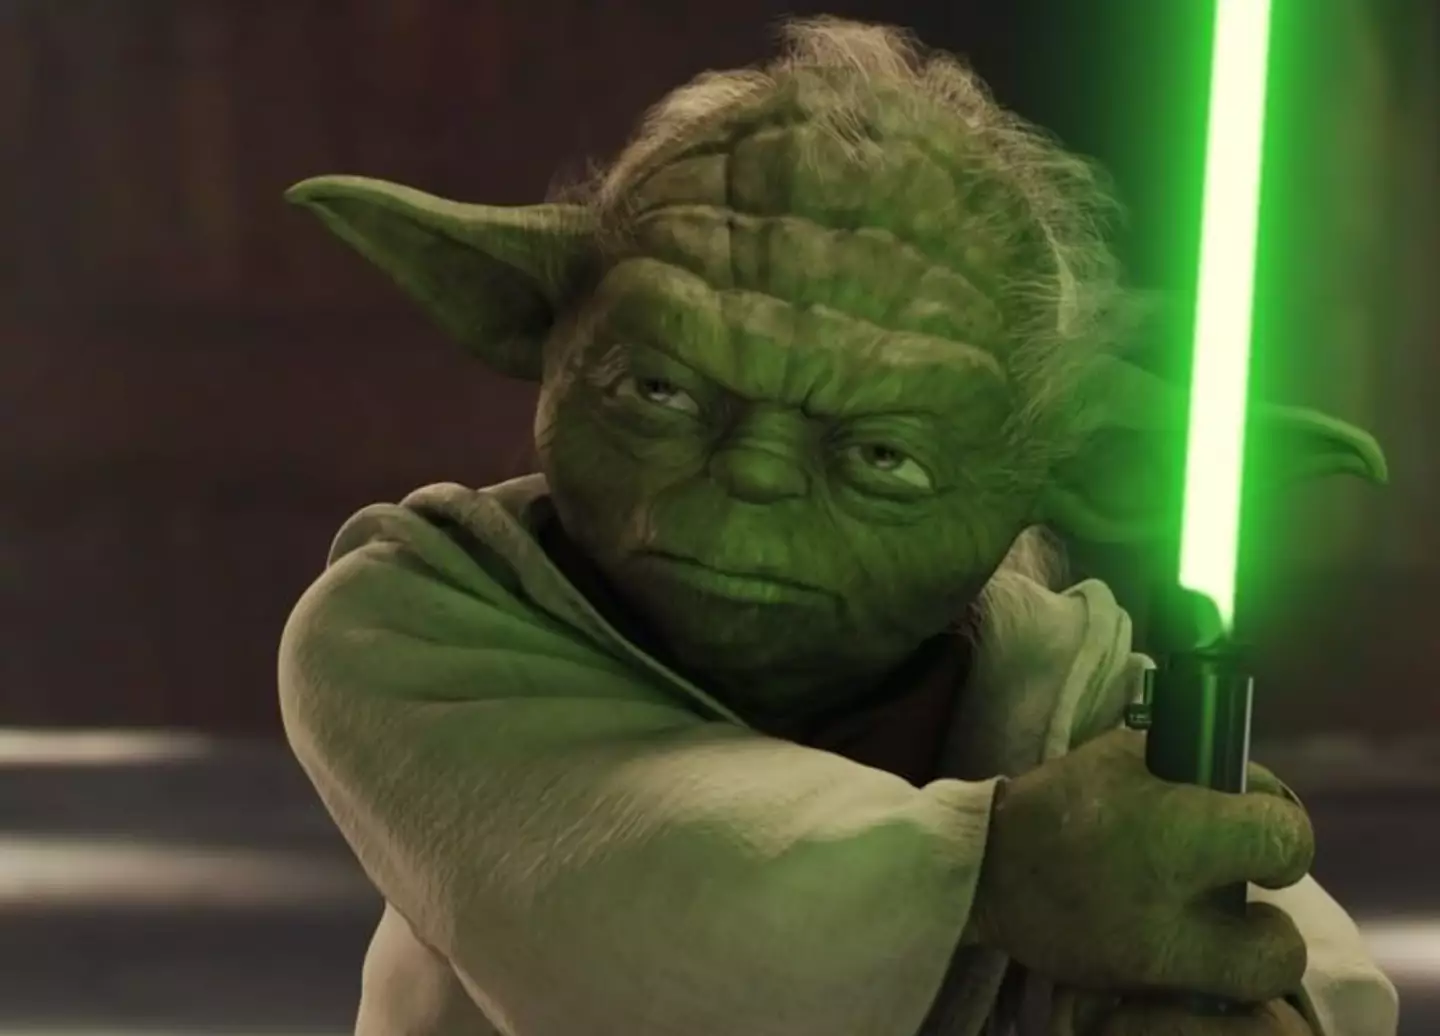 Yoda is a pretty iconic character from Star Wars.